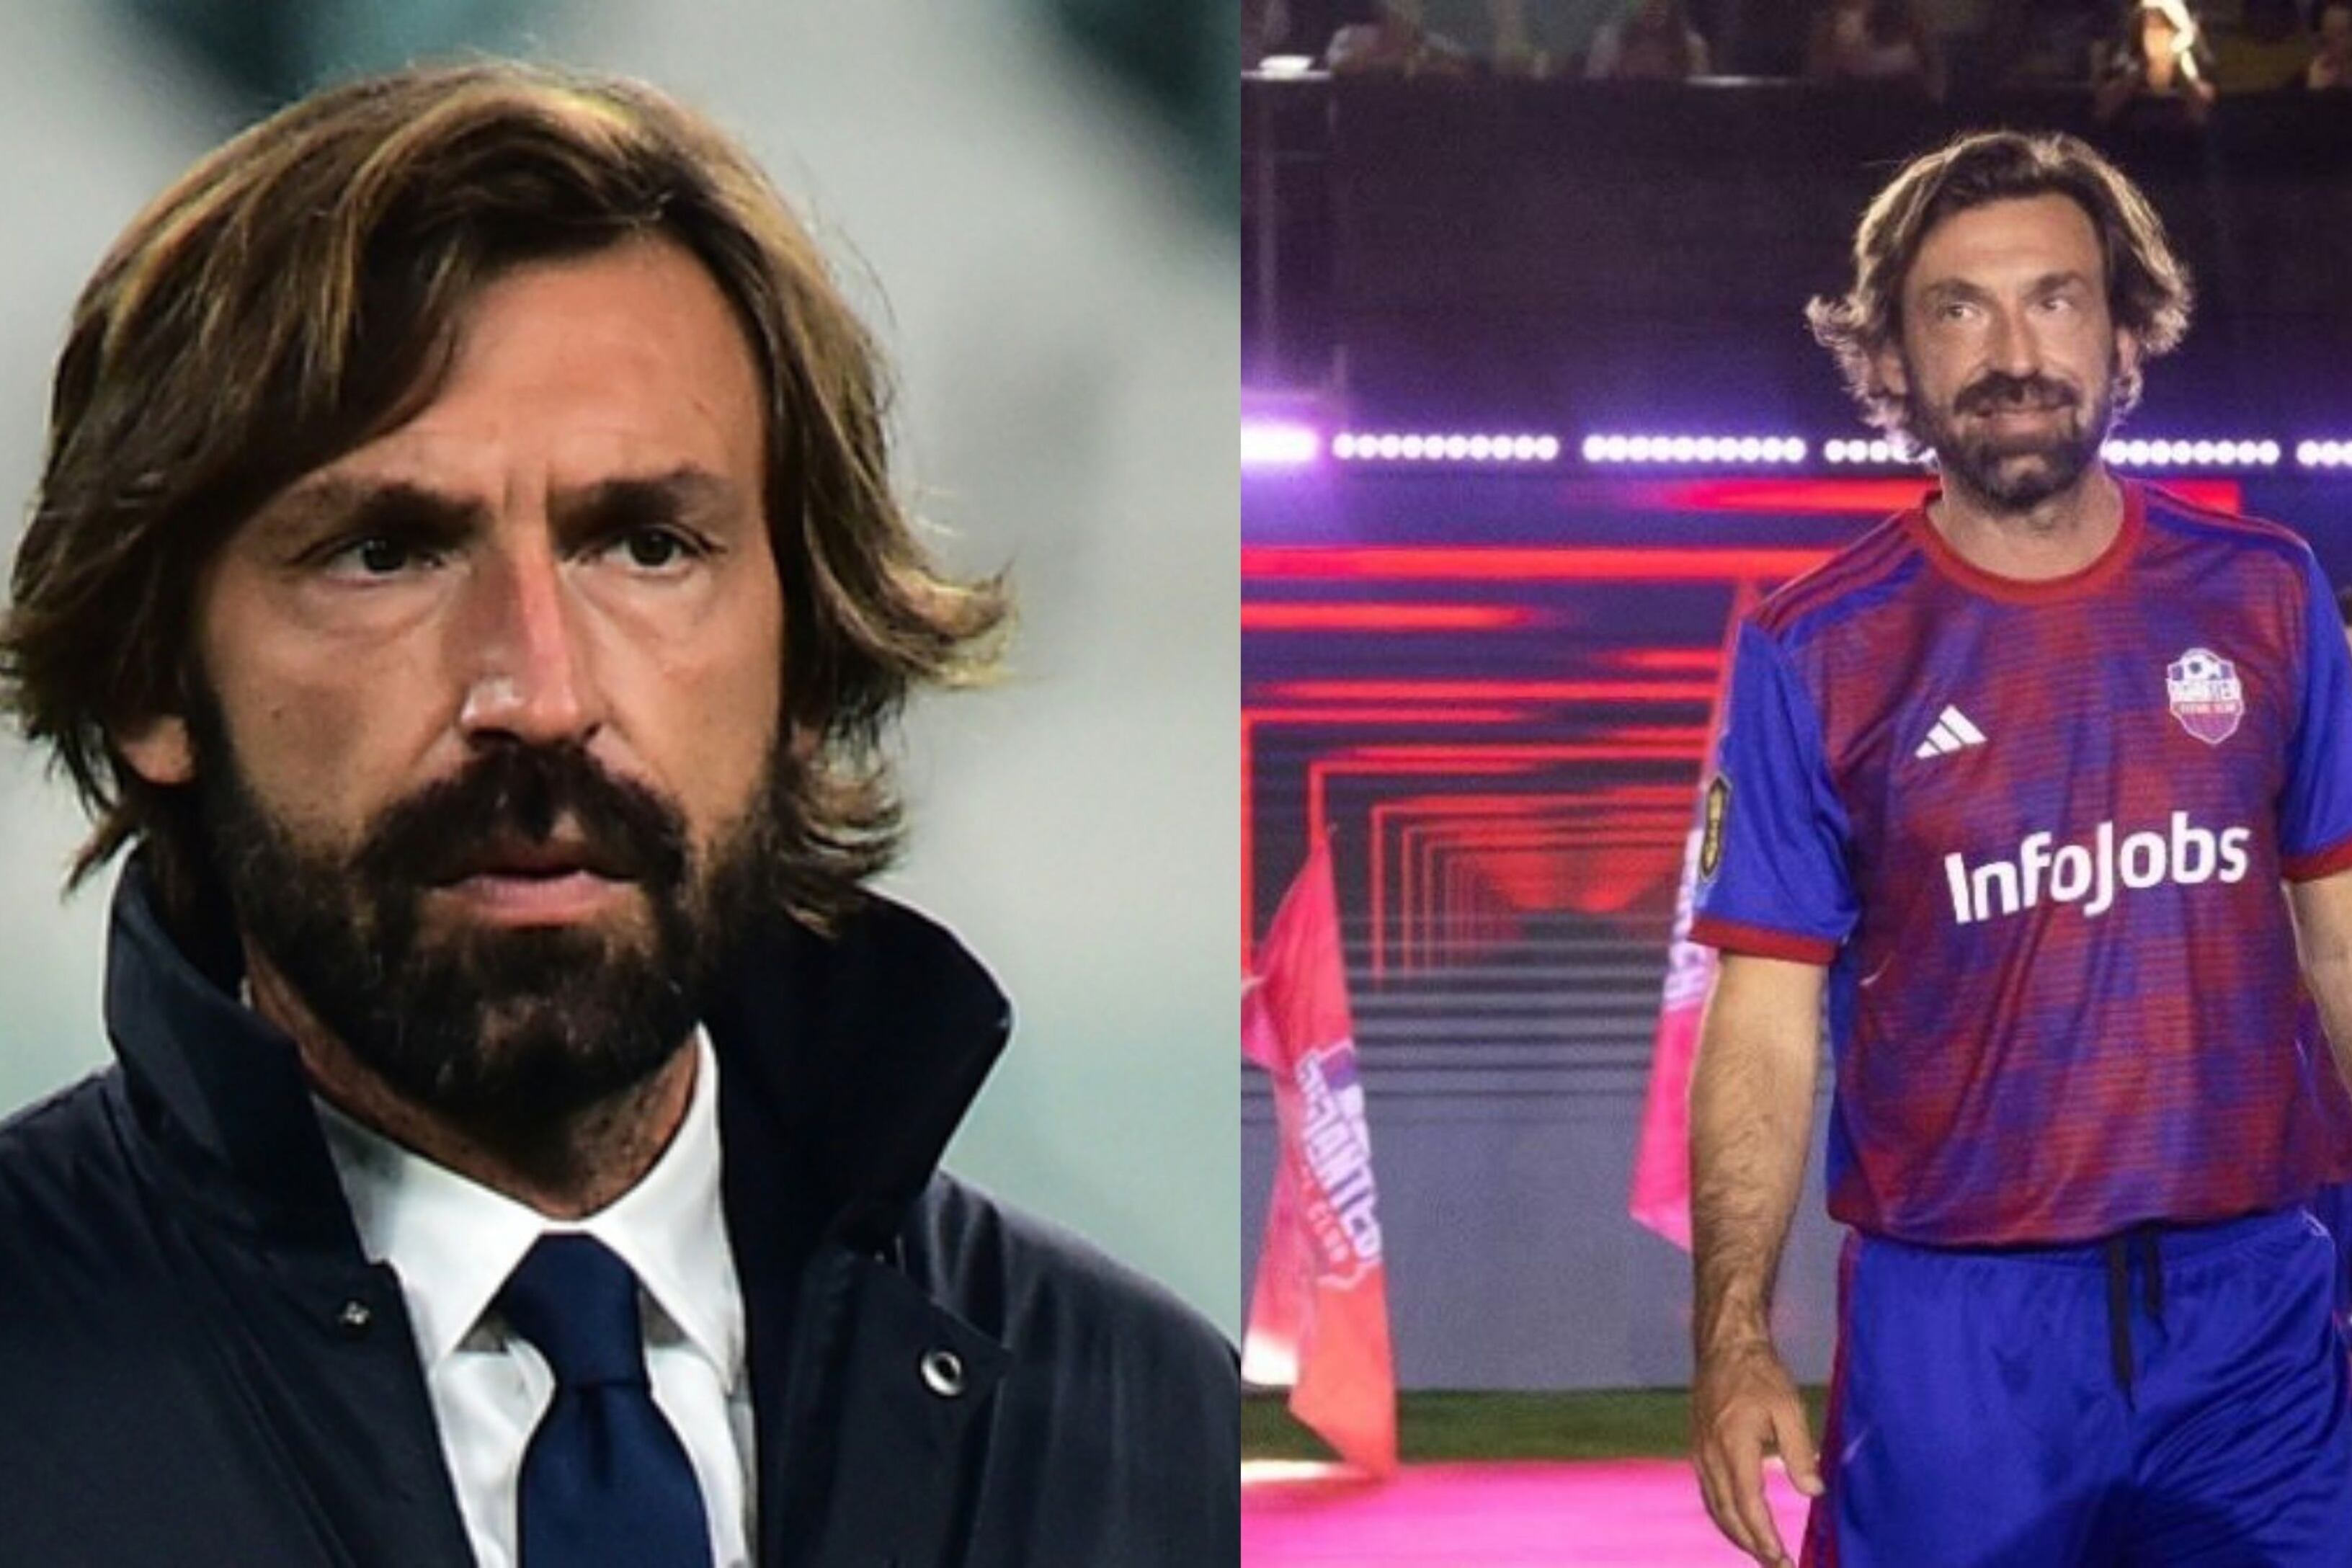 He earned 3.5 million, the salary Andrea Pirlo receives in the Kings League